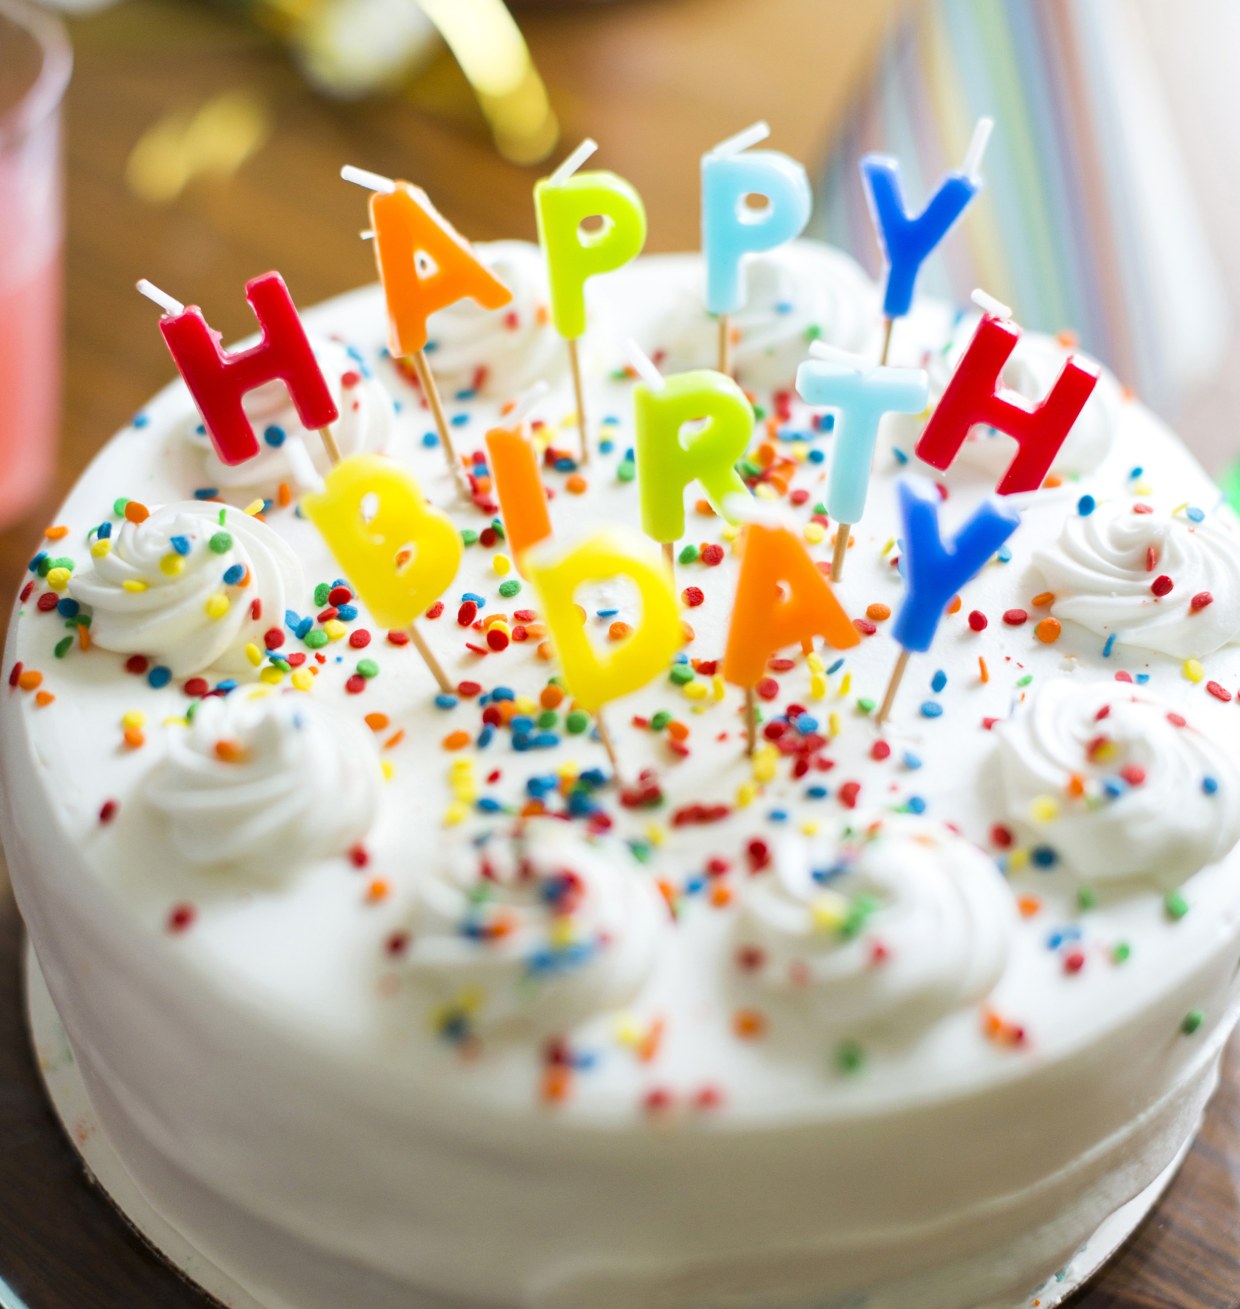 Music Company Does Not Own Happy Birthday Song Copyright Judge Rules